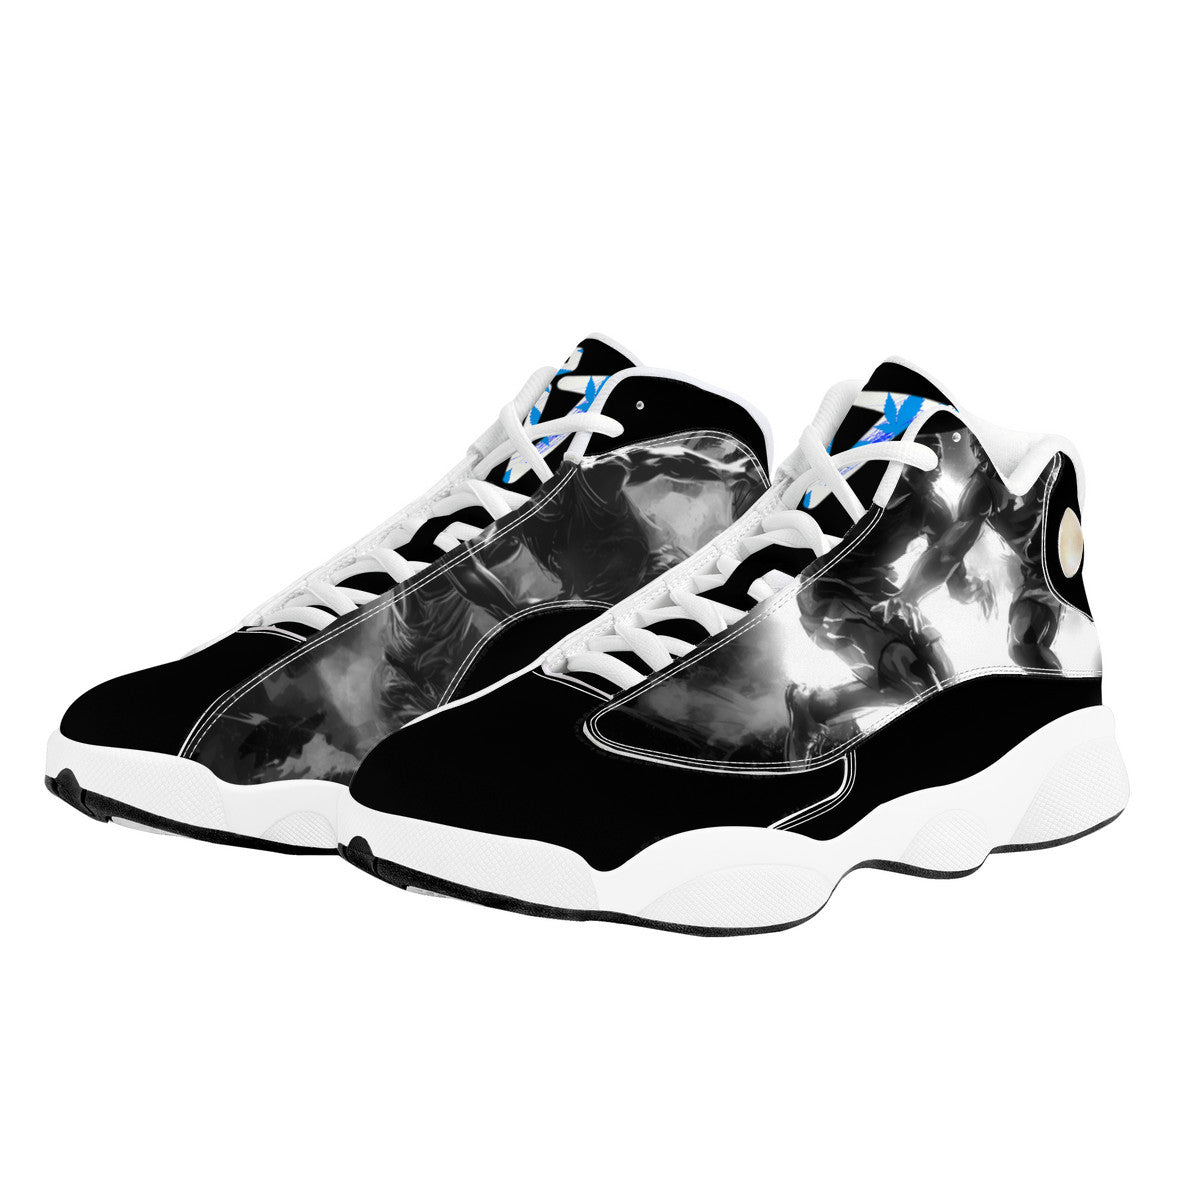 RVT Basketball Shoes - In the Game black/grey